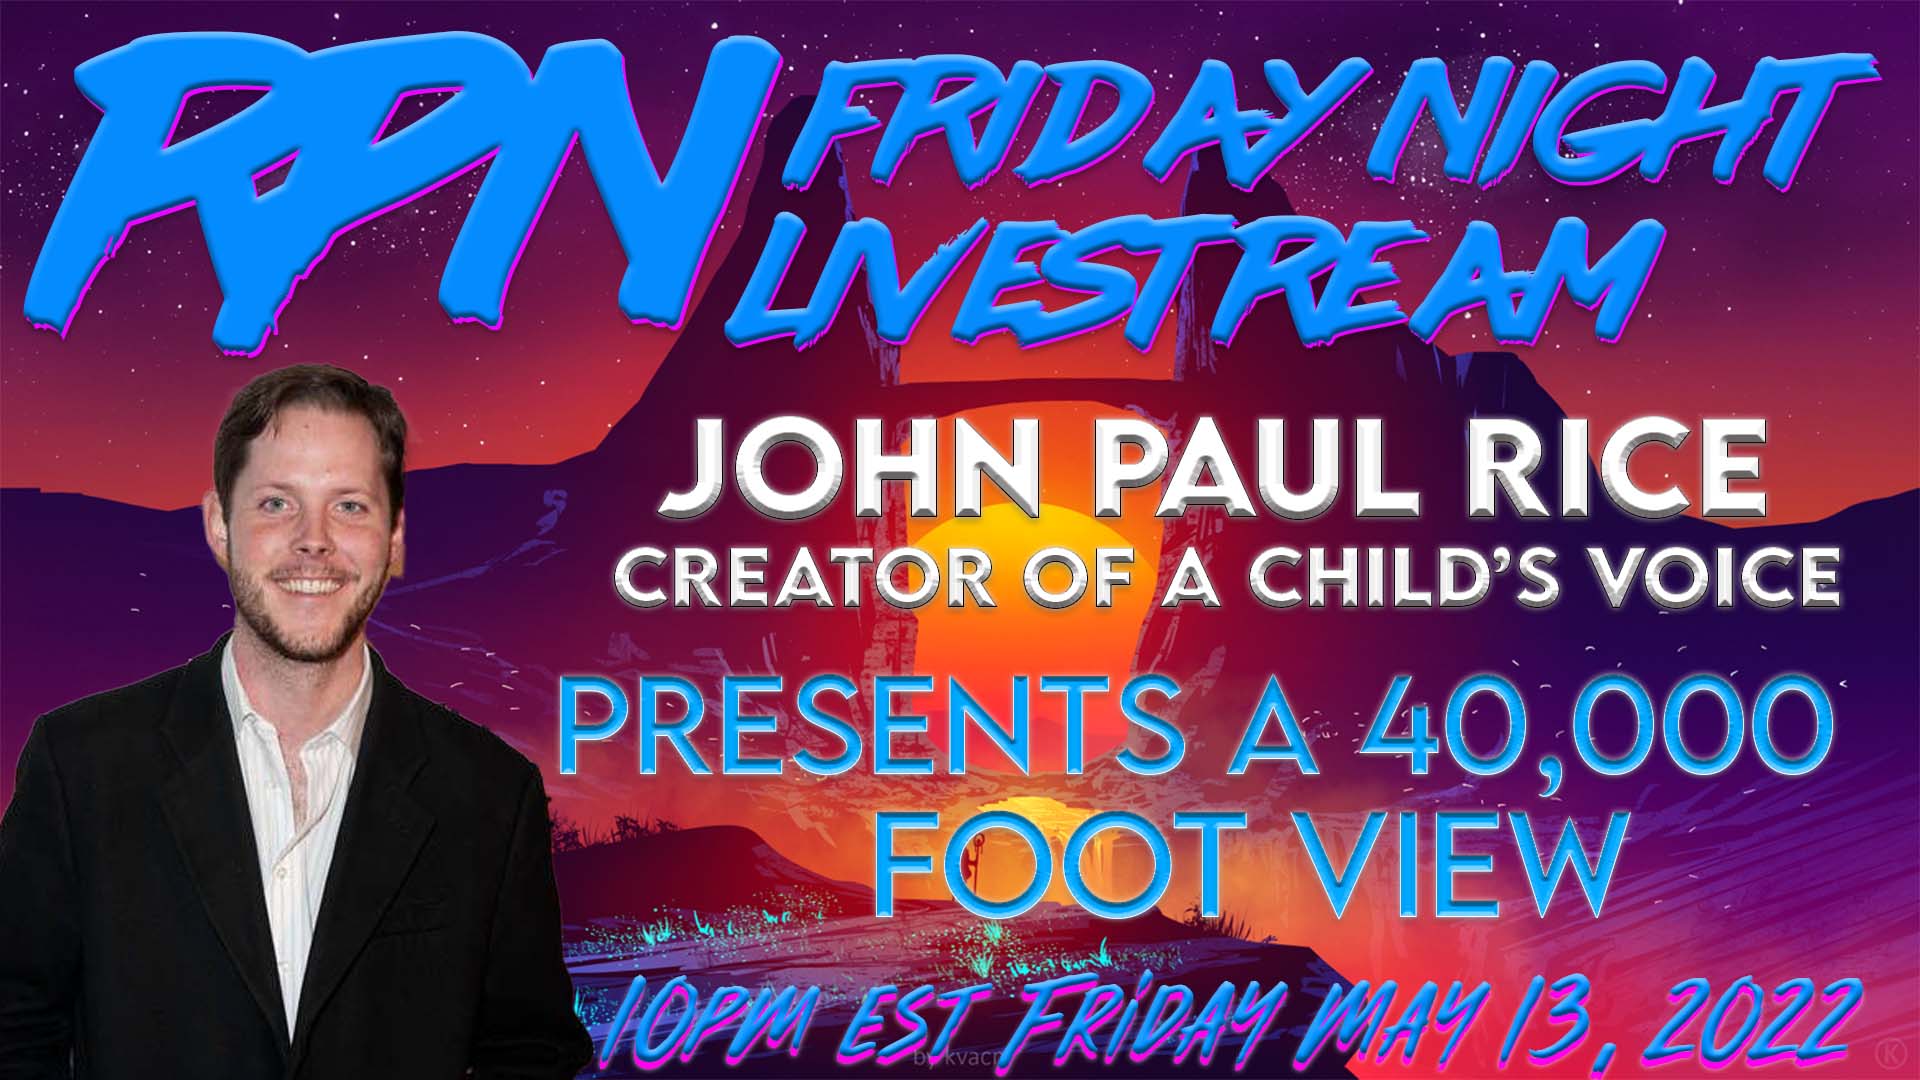 A 40,000 FOOT VIEW WITH JOHN PAUL RICE ON SAT. NIGHT LIVESTREAM